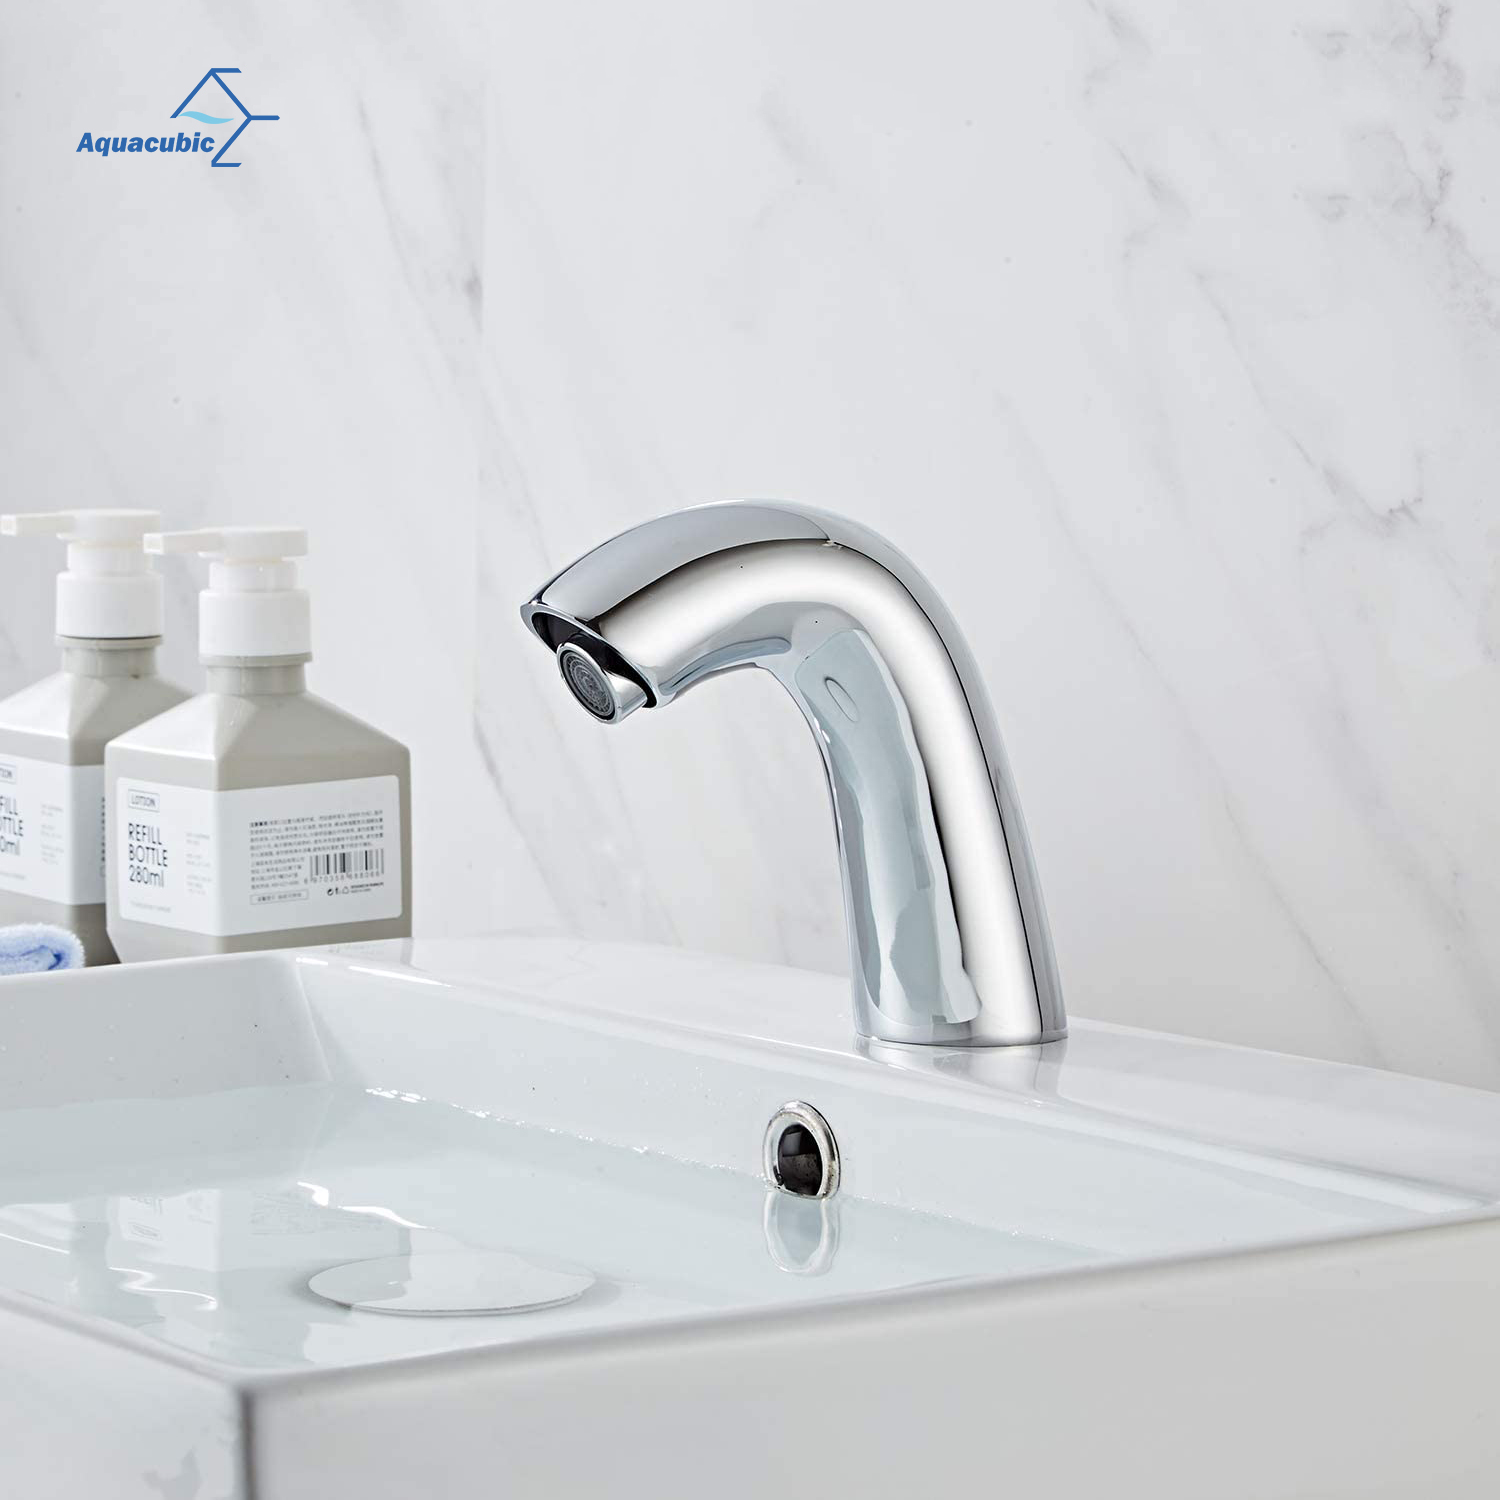 Automatic Sensor Touchless Chrome Bathroom Sink Faucet with Control Box and Temperature Mixer